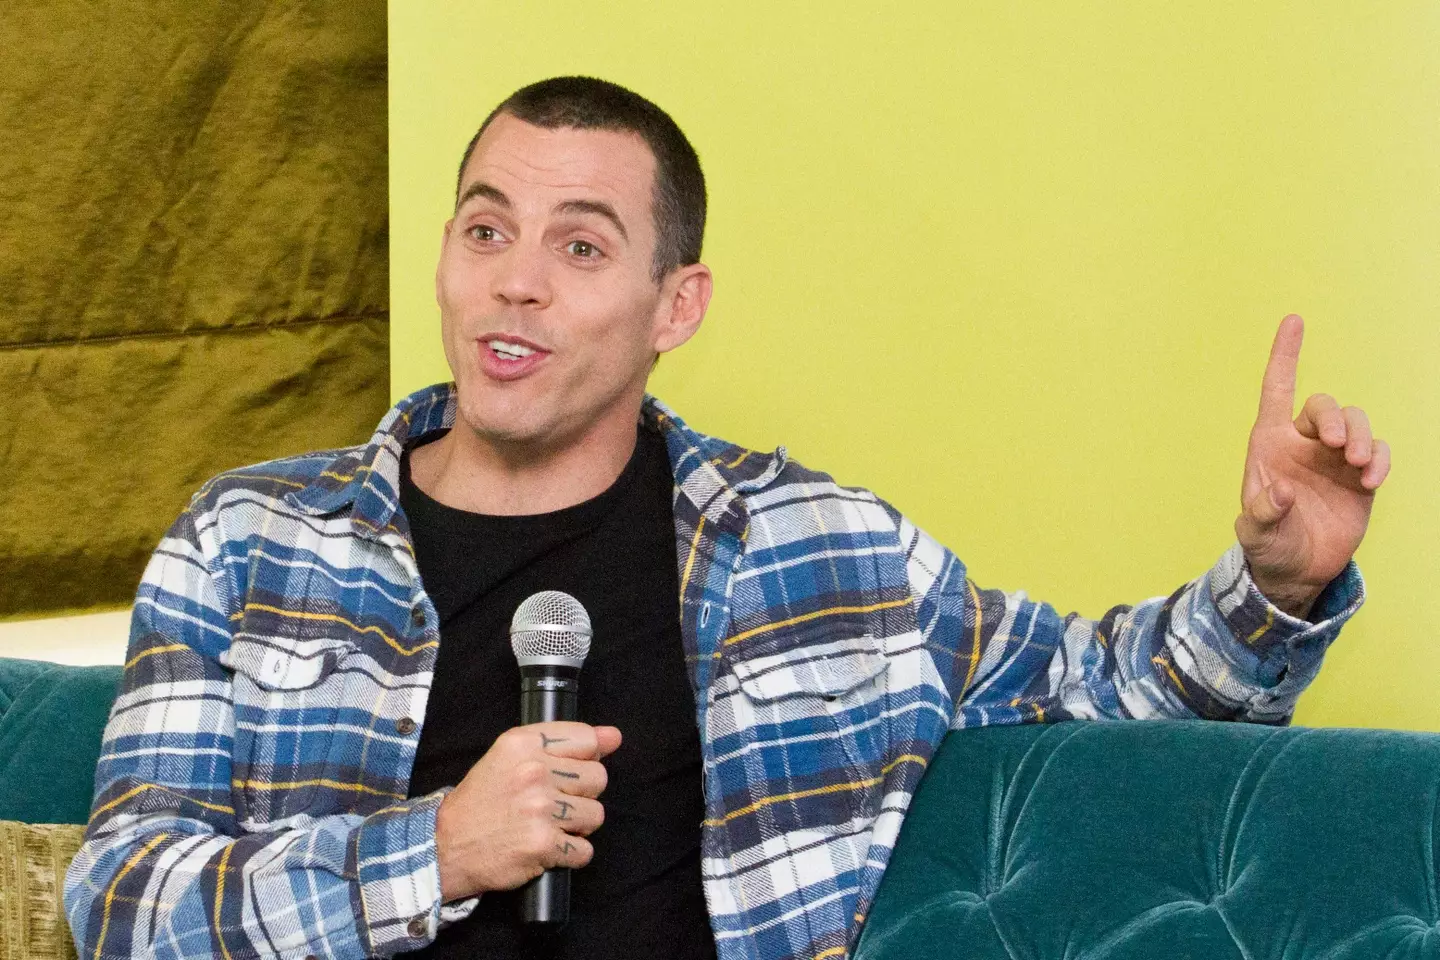 Steve-O has said he wants to get breast implants as that will be as shocking as possible.